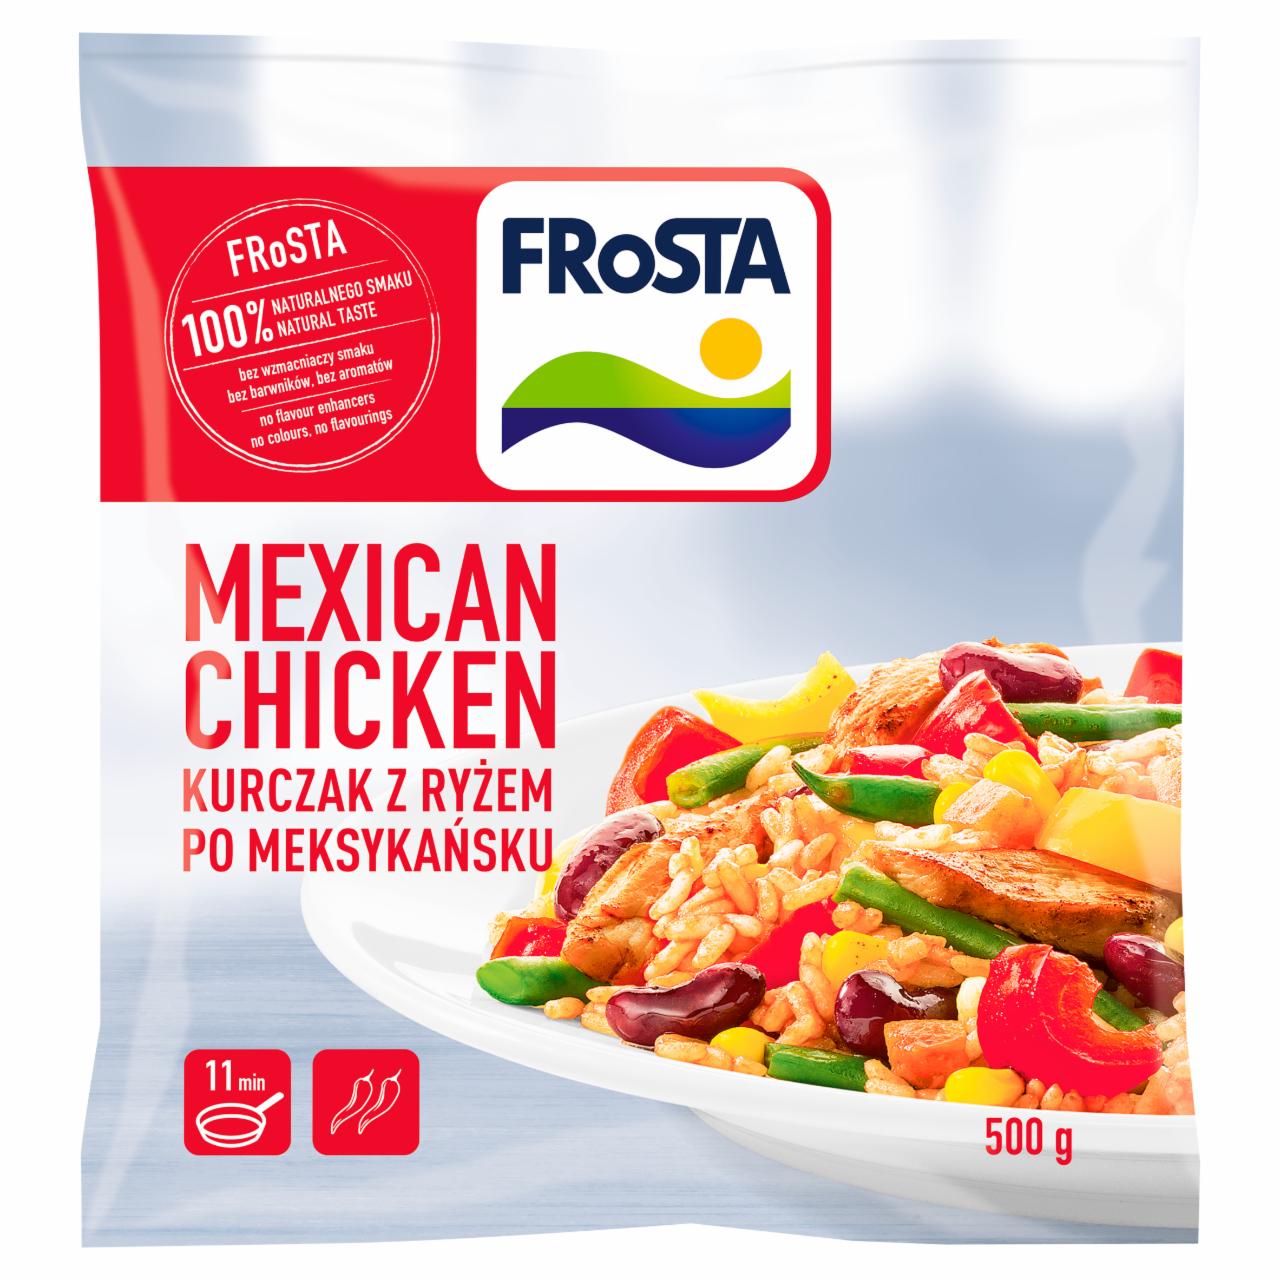 Photo - FRoSTA Mexican Chicken Mexican Dish 500 g